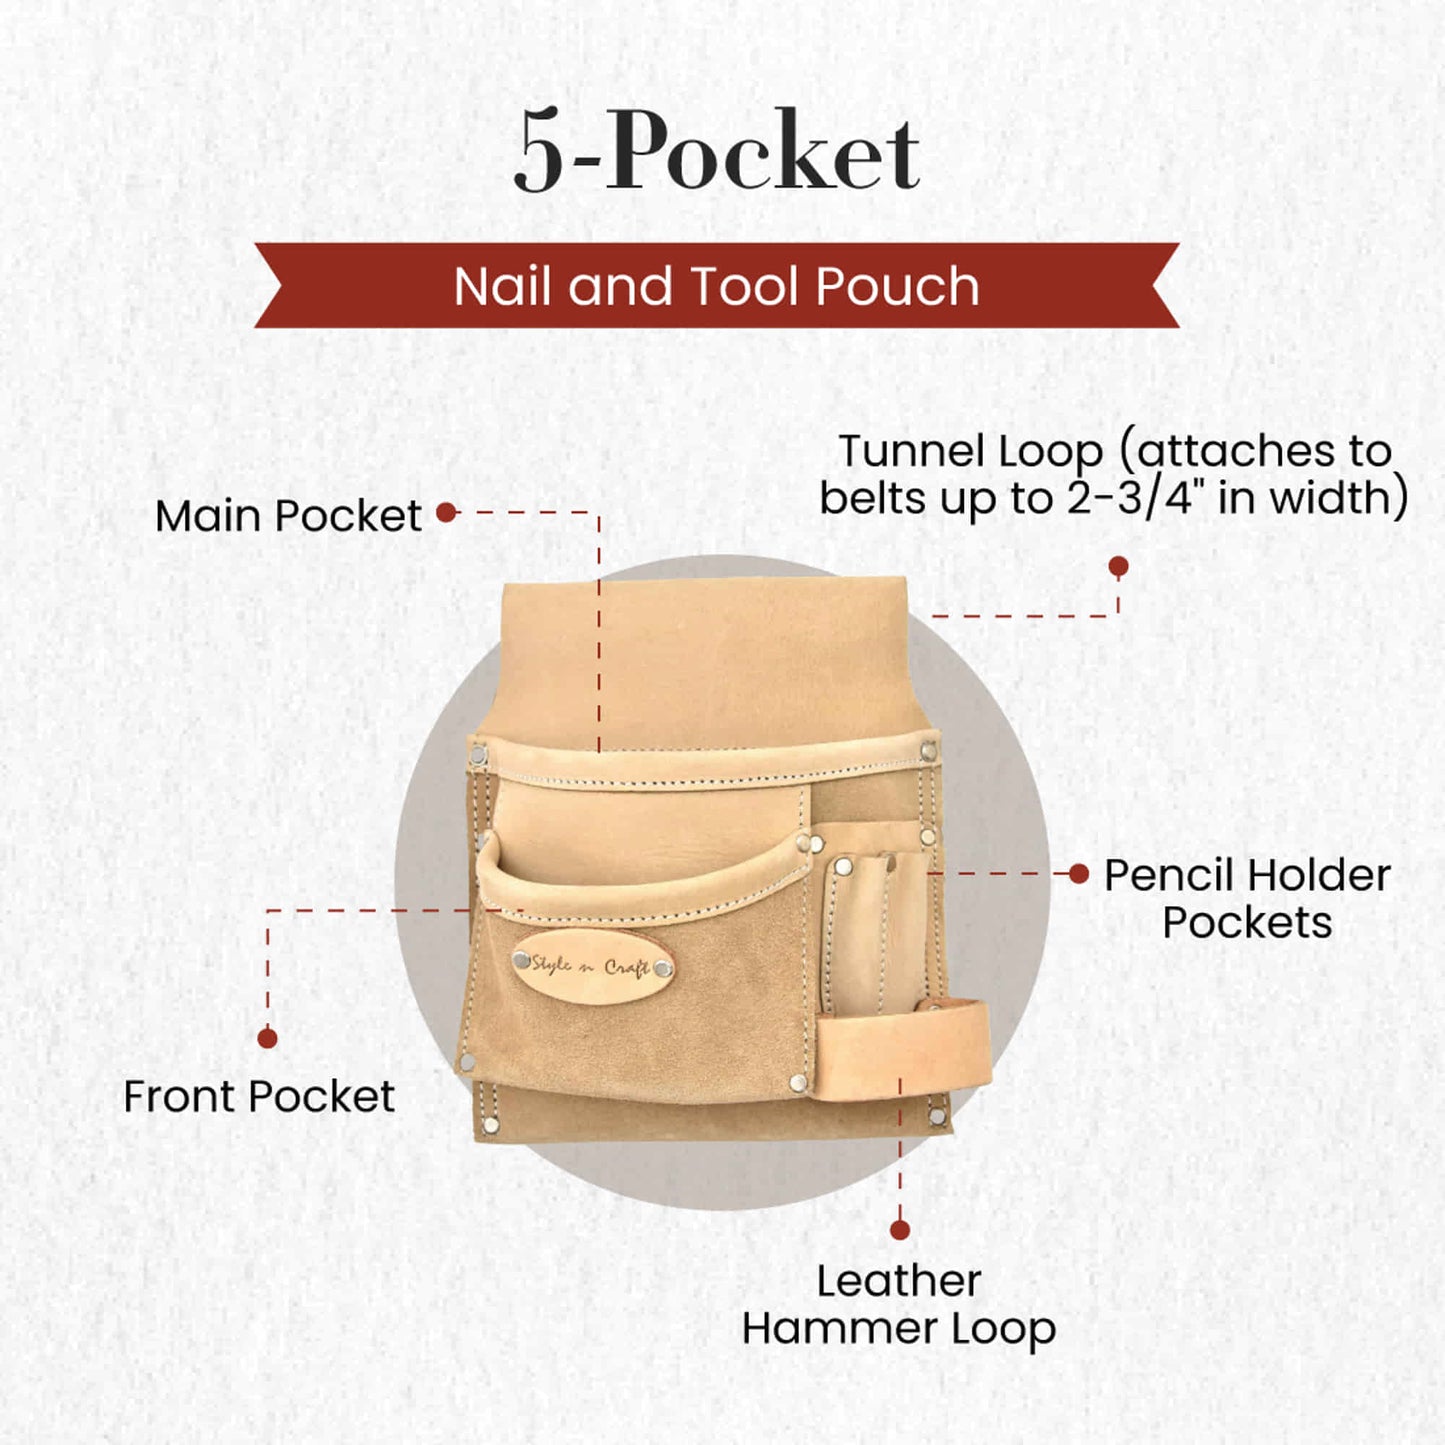 Style n Craft 92826 - 5 Pocket Nail & Tool Pouch in Top Grain Leather in grey color - Front view showing the details